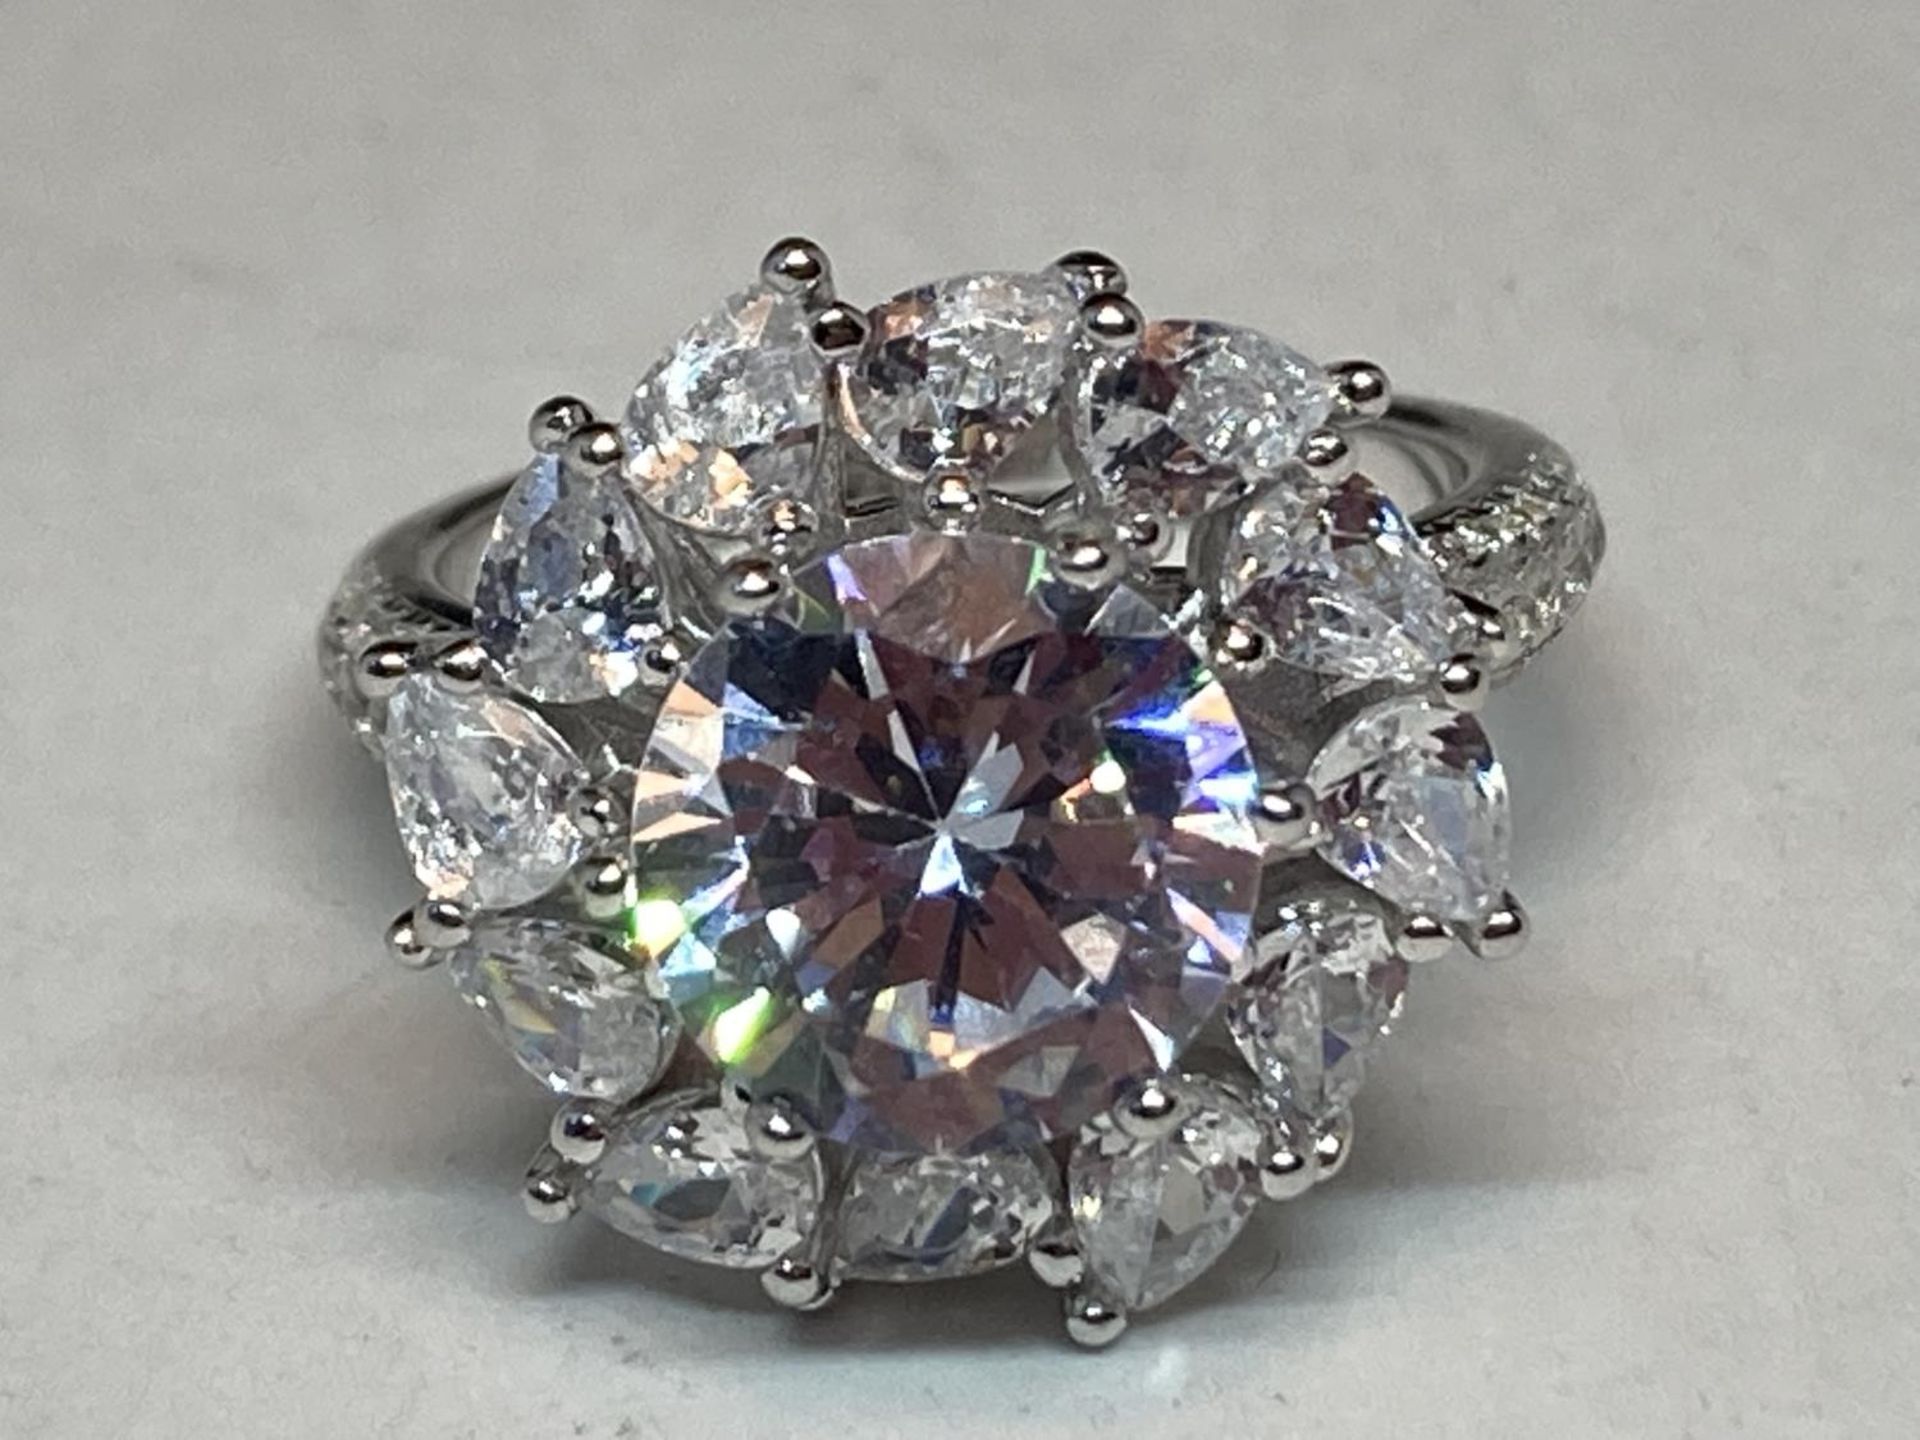 A WHITE METAL RING WITH 3 CARATS OF MOISSANITE STONES IN A FLOWER DESIGN AND ON THE SHOULDERS SIZE N